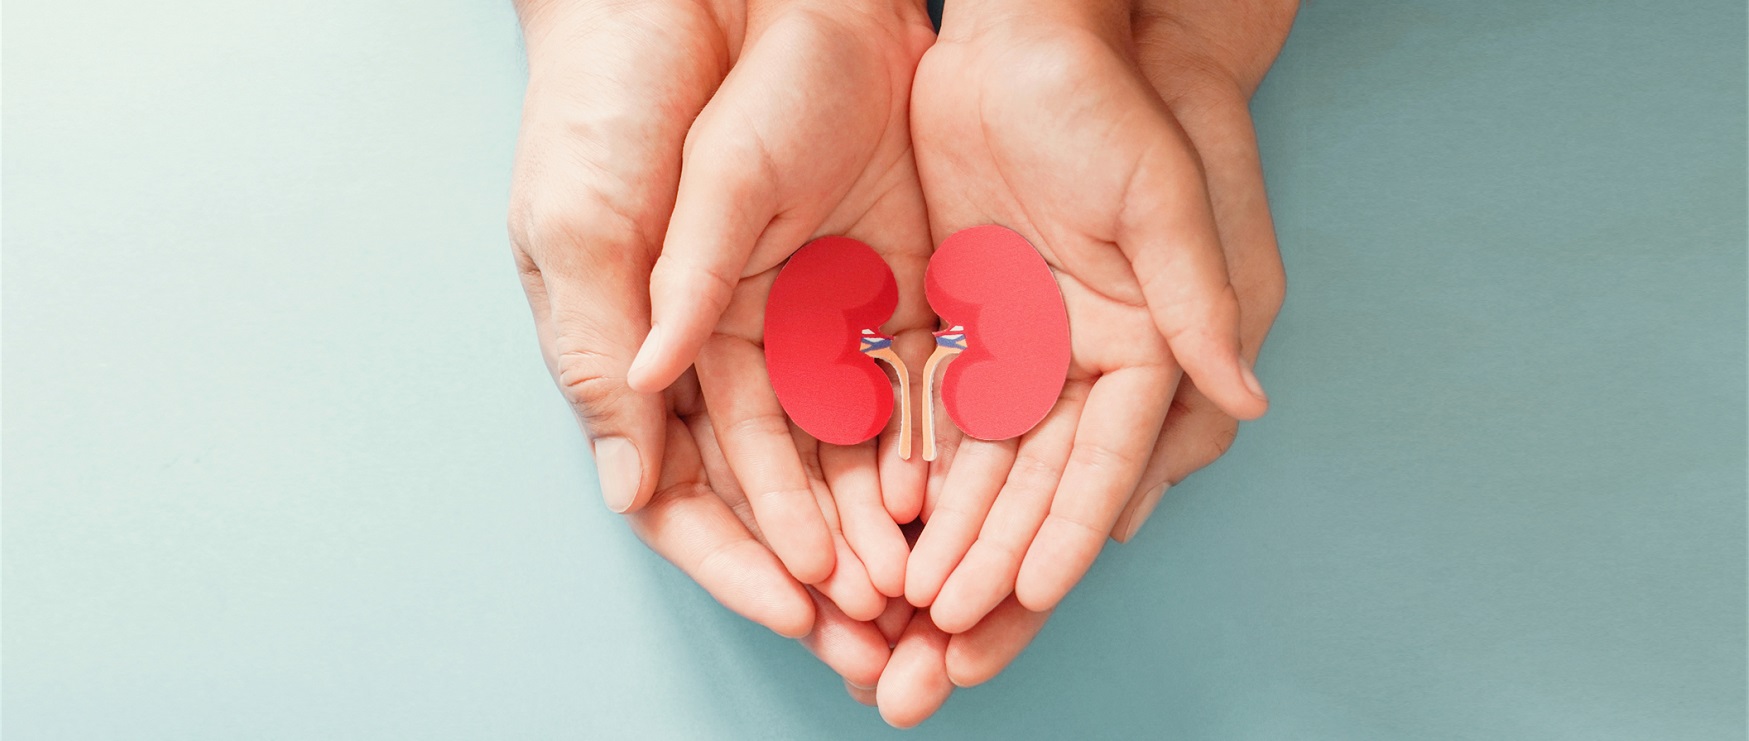 Parent and Child's hands holding a paper cut out of a kidney